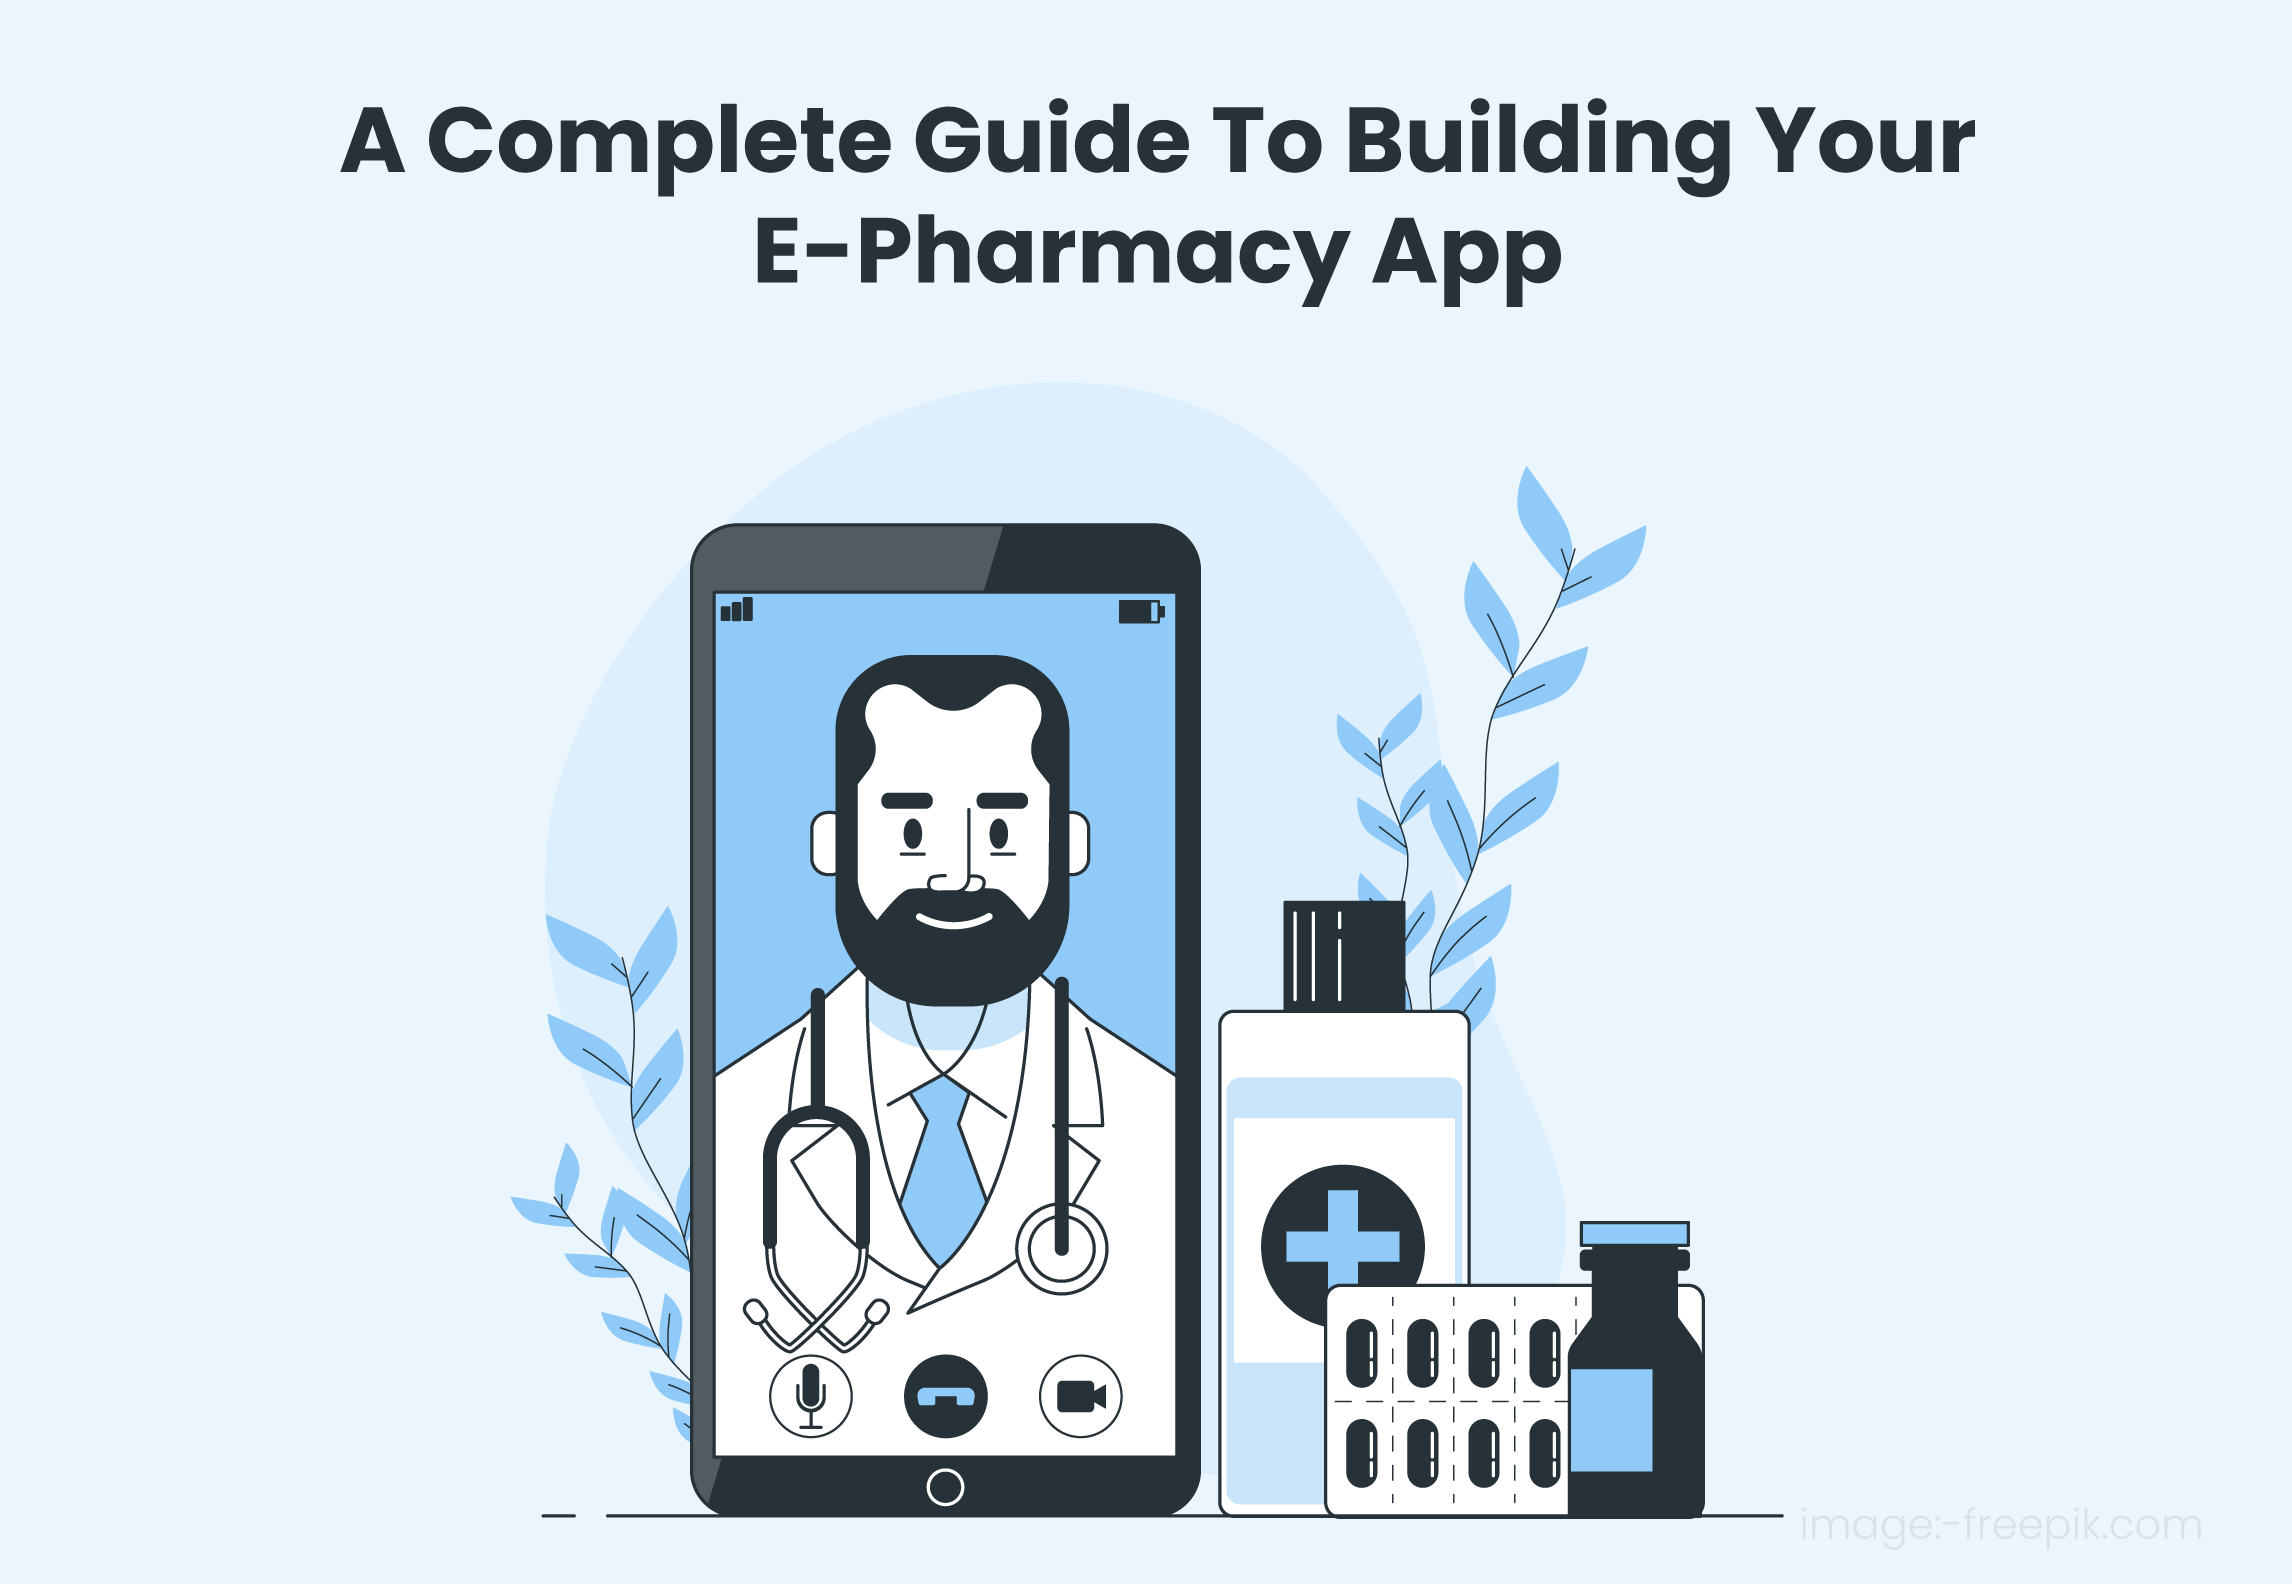 Step-by-step Guide to Developing Your Online Pharmacy App